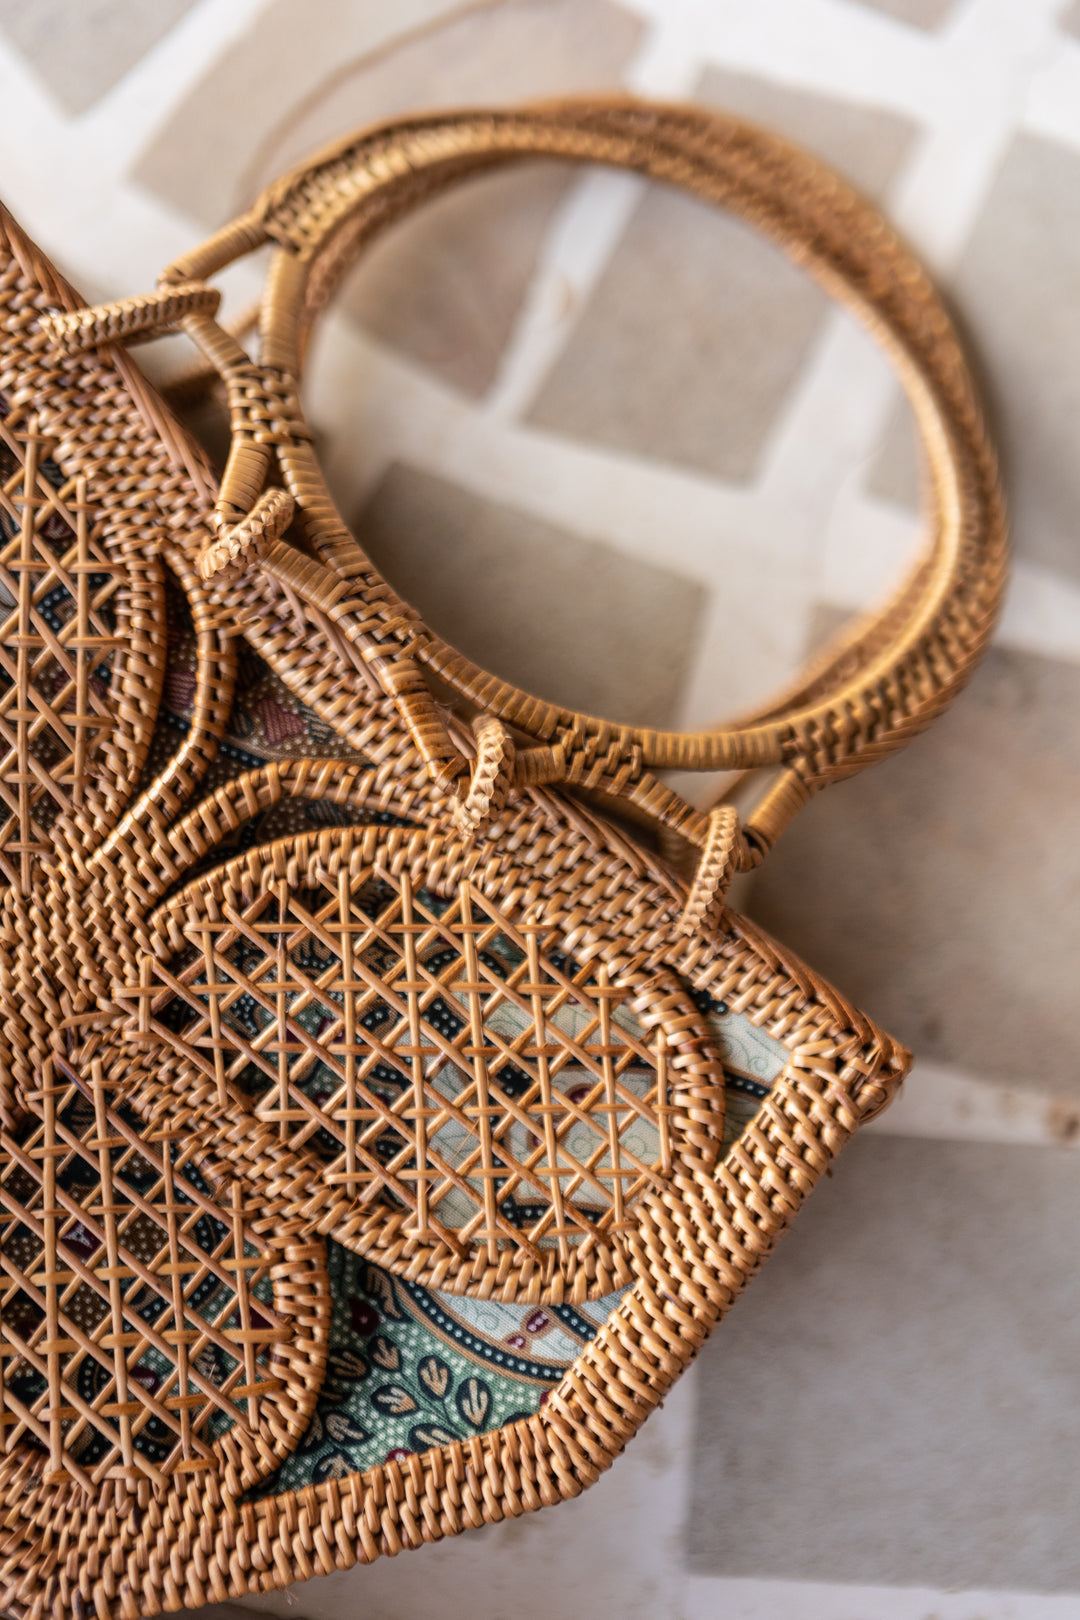 Small "butterfly" rattan bag